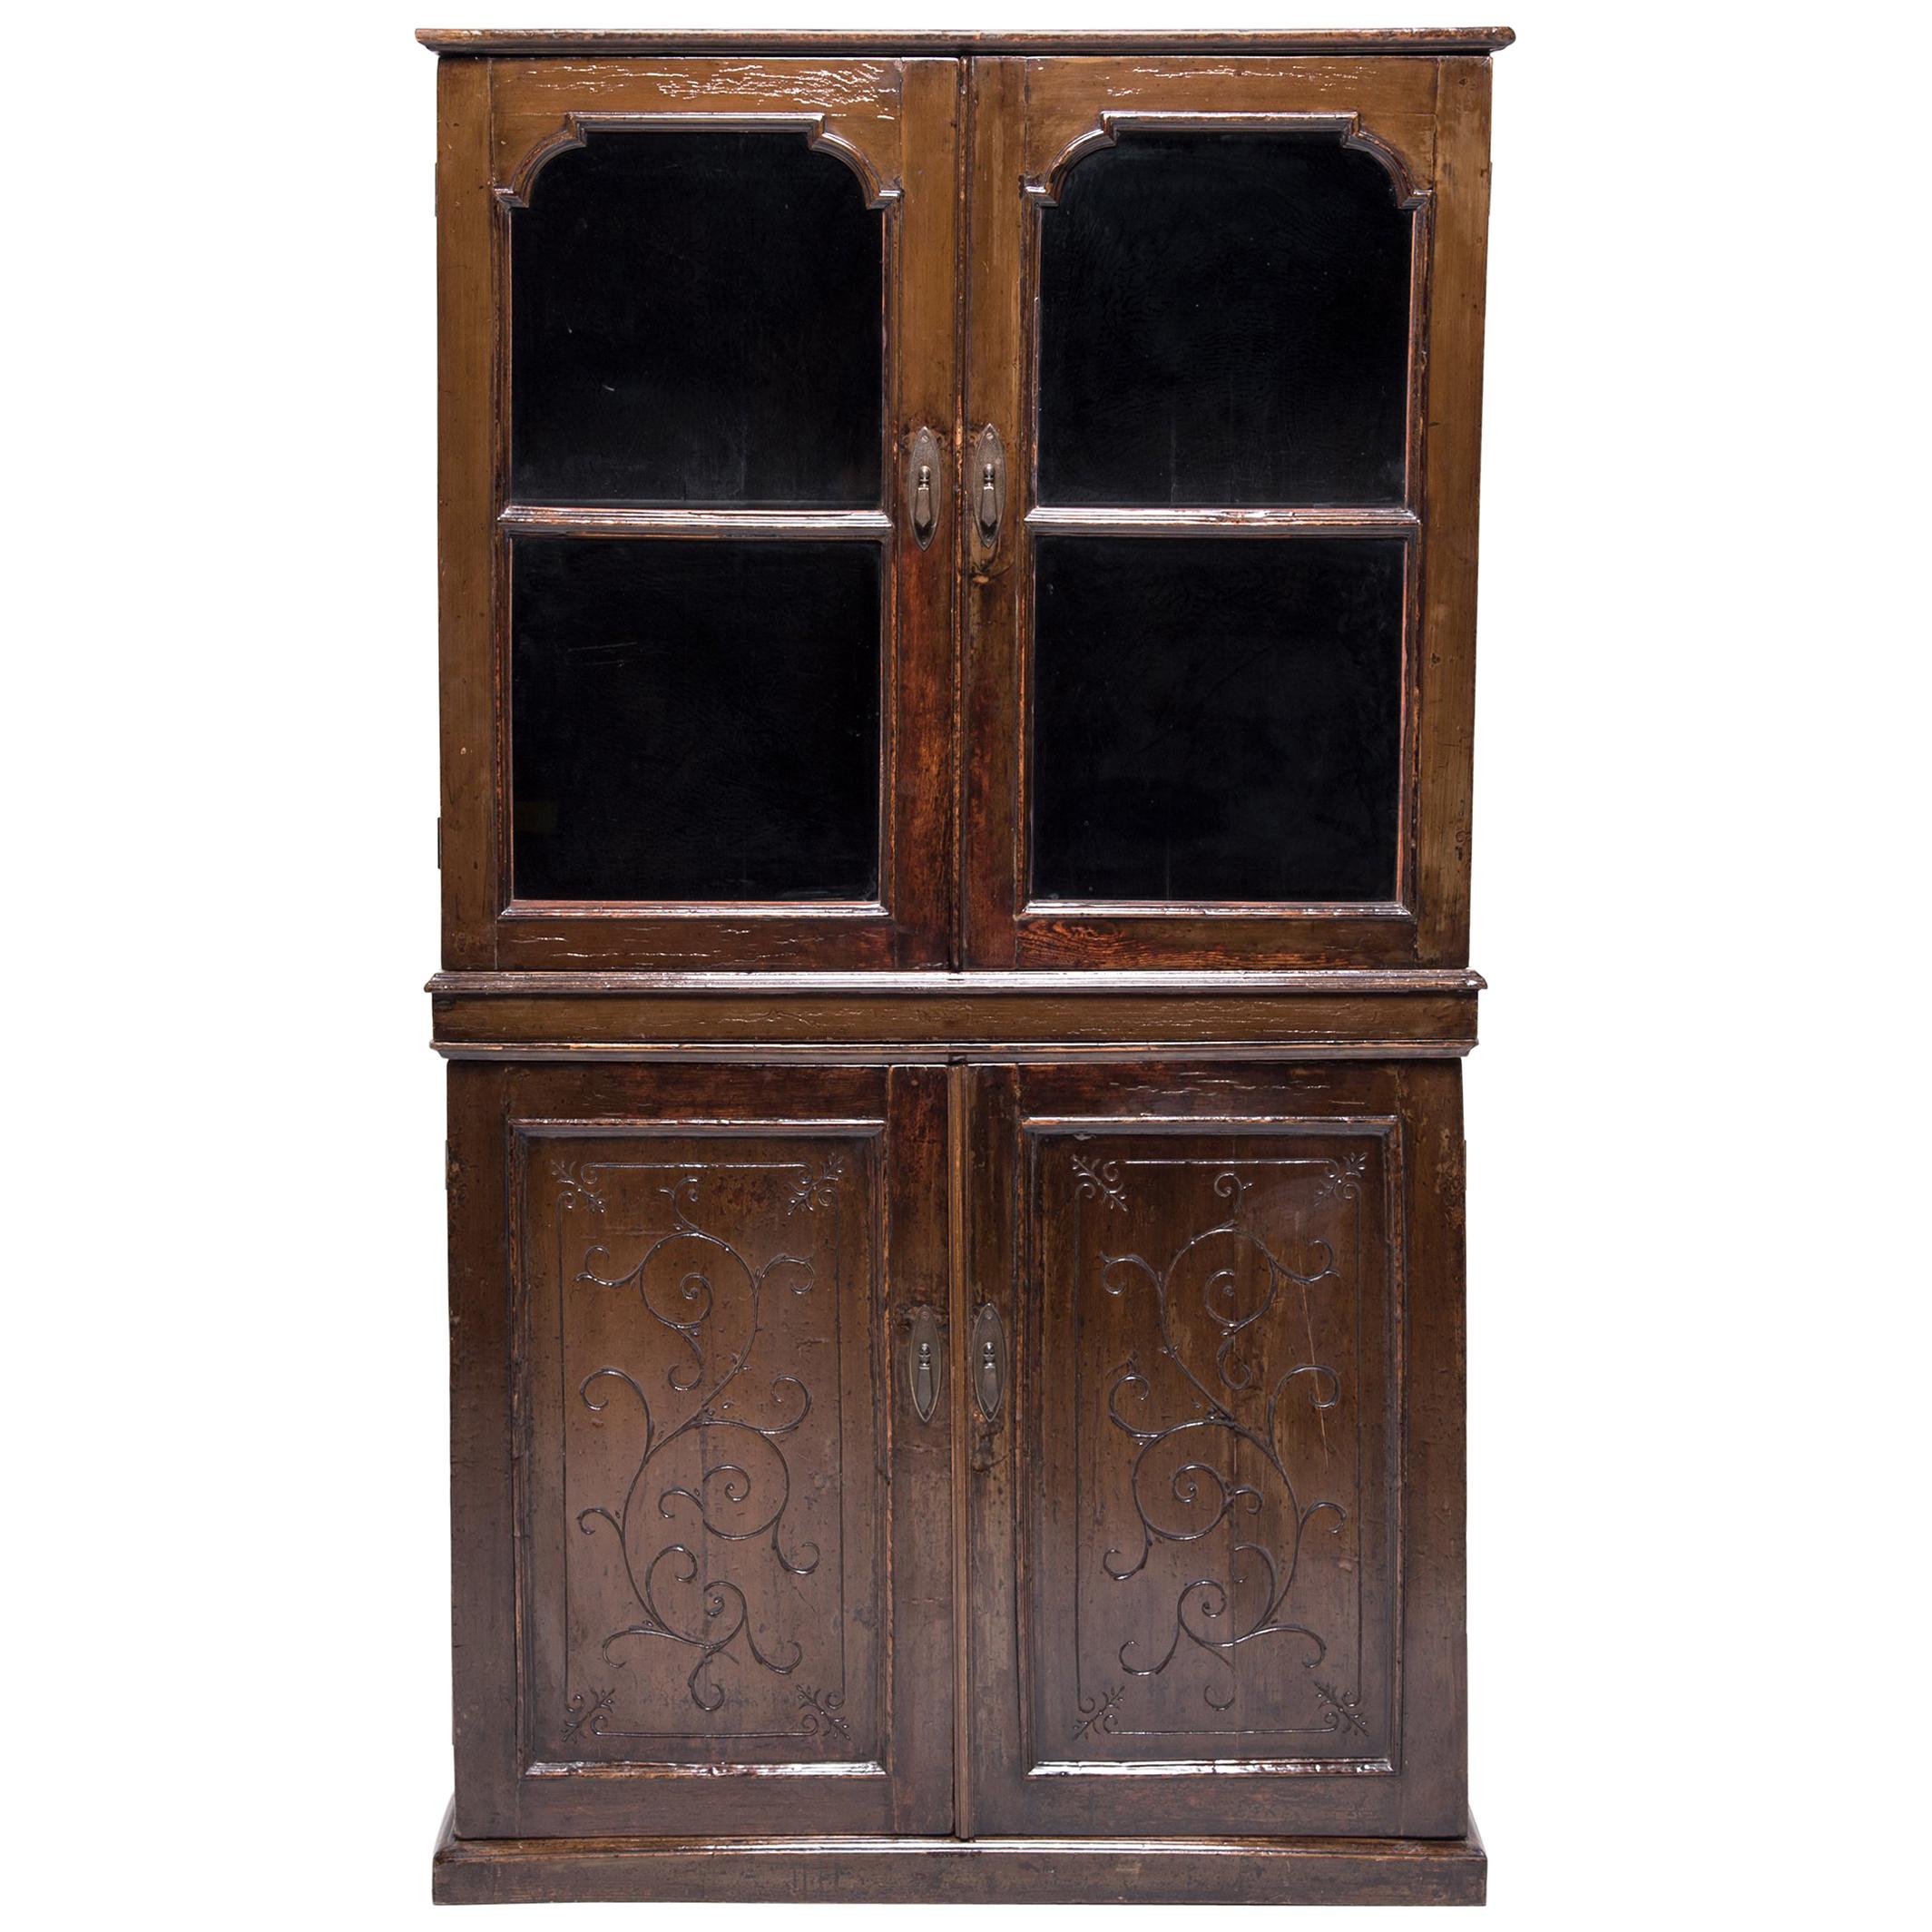 Early 20th Century Chinese Four-Door Glass Front Cabinet